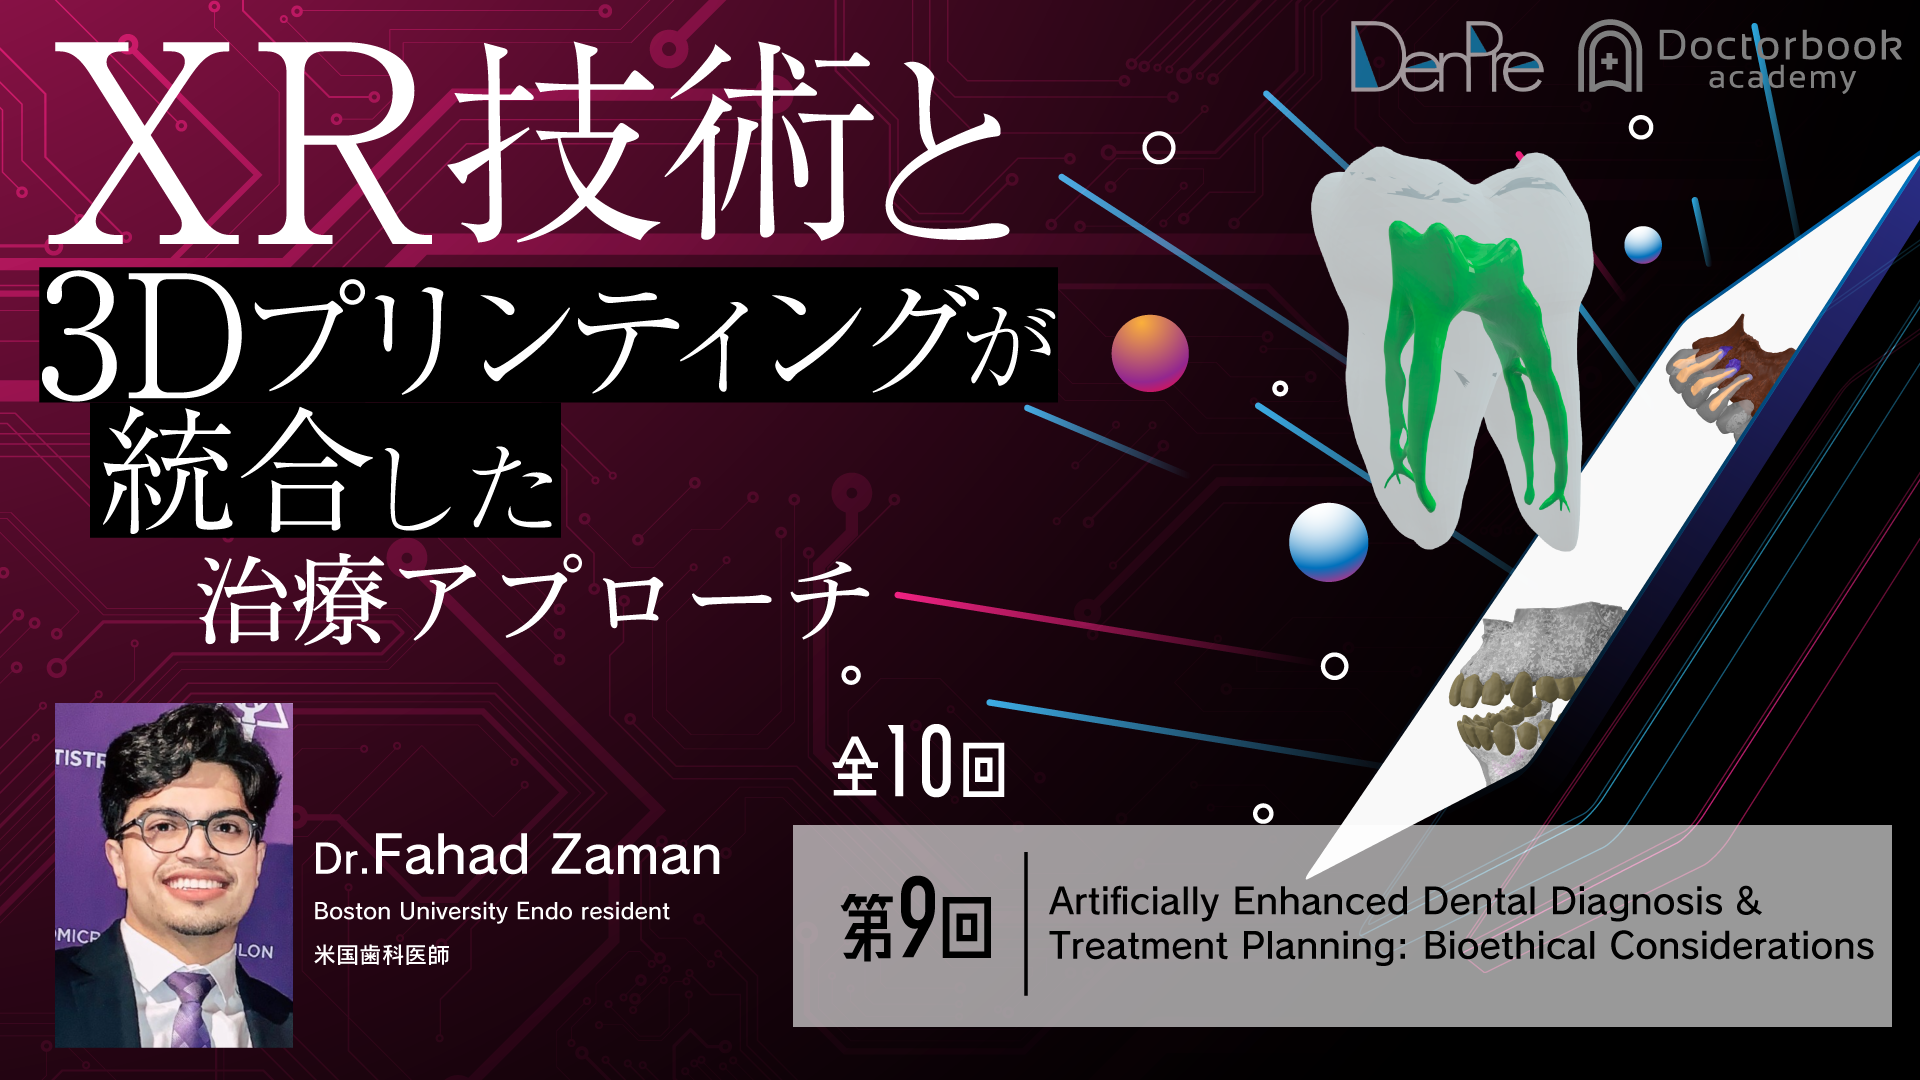 Artificially Enhanced Dental Diagnosis & Treatment Planning: Bioethical Considerations│Dr.Fahad Zaman